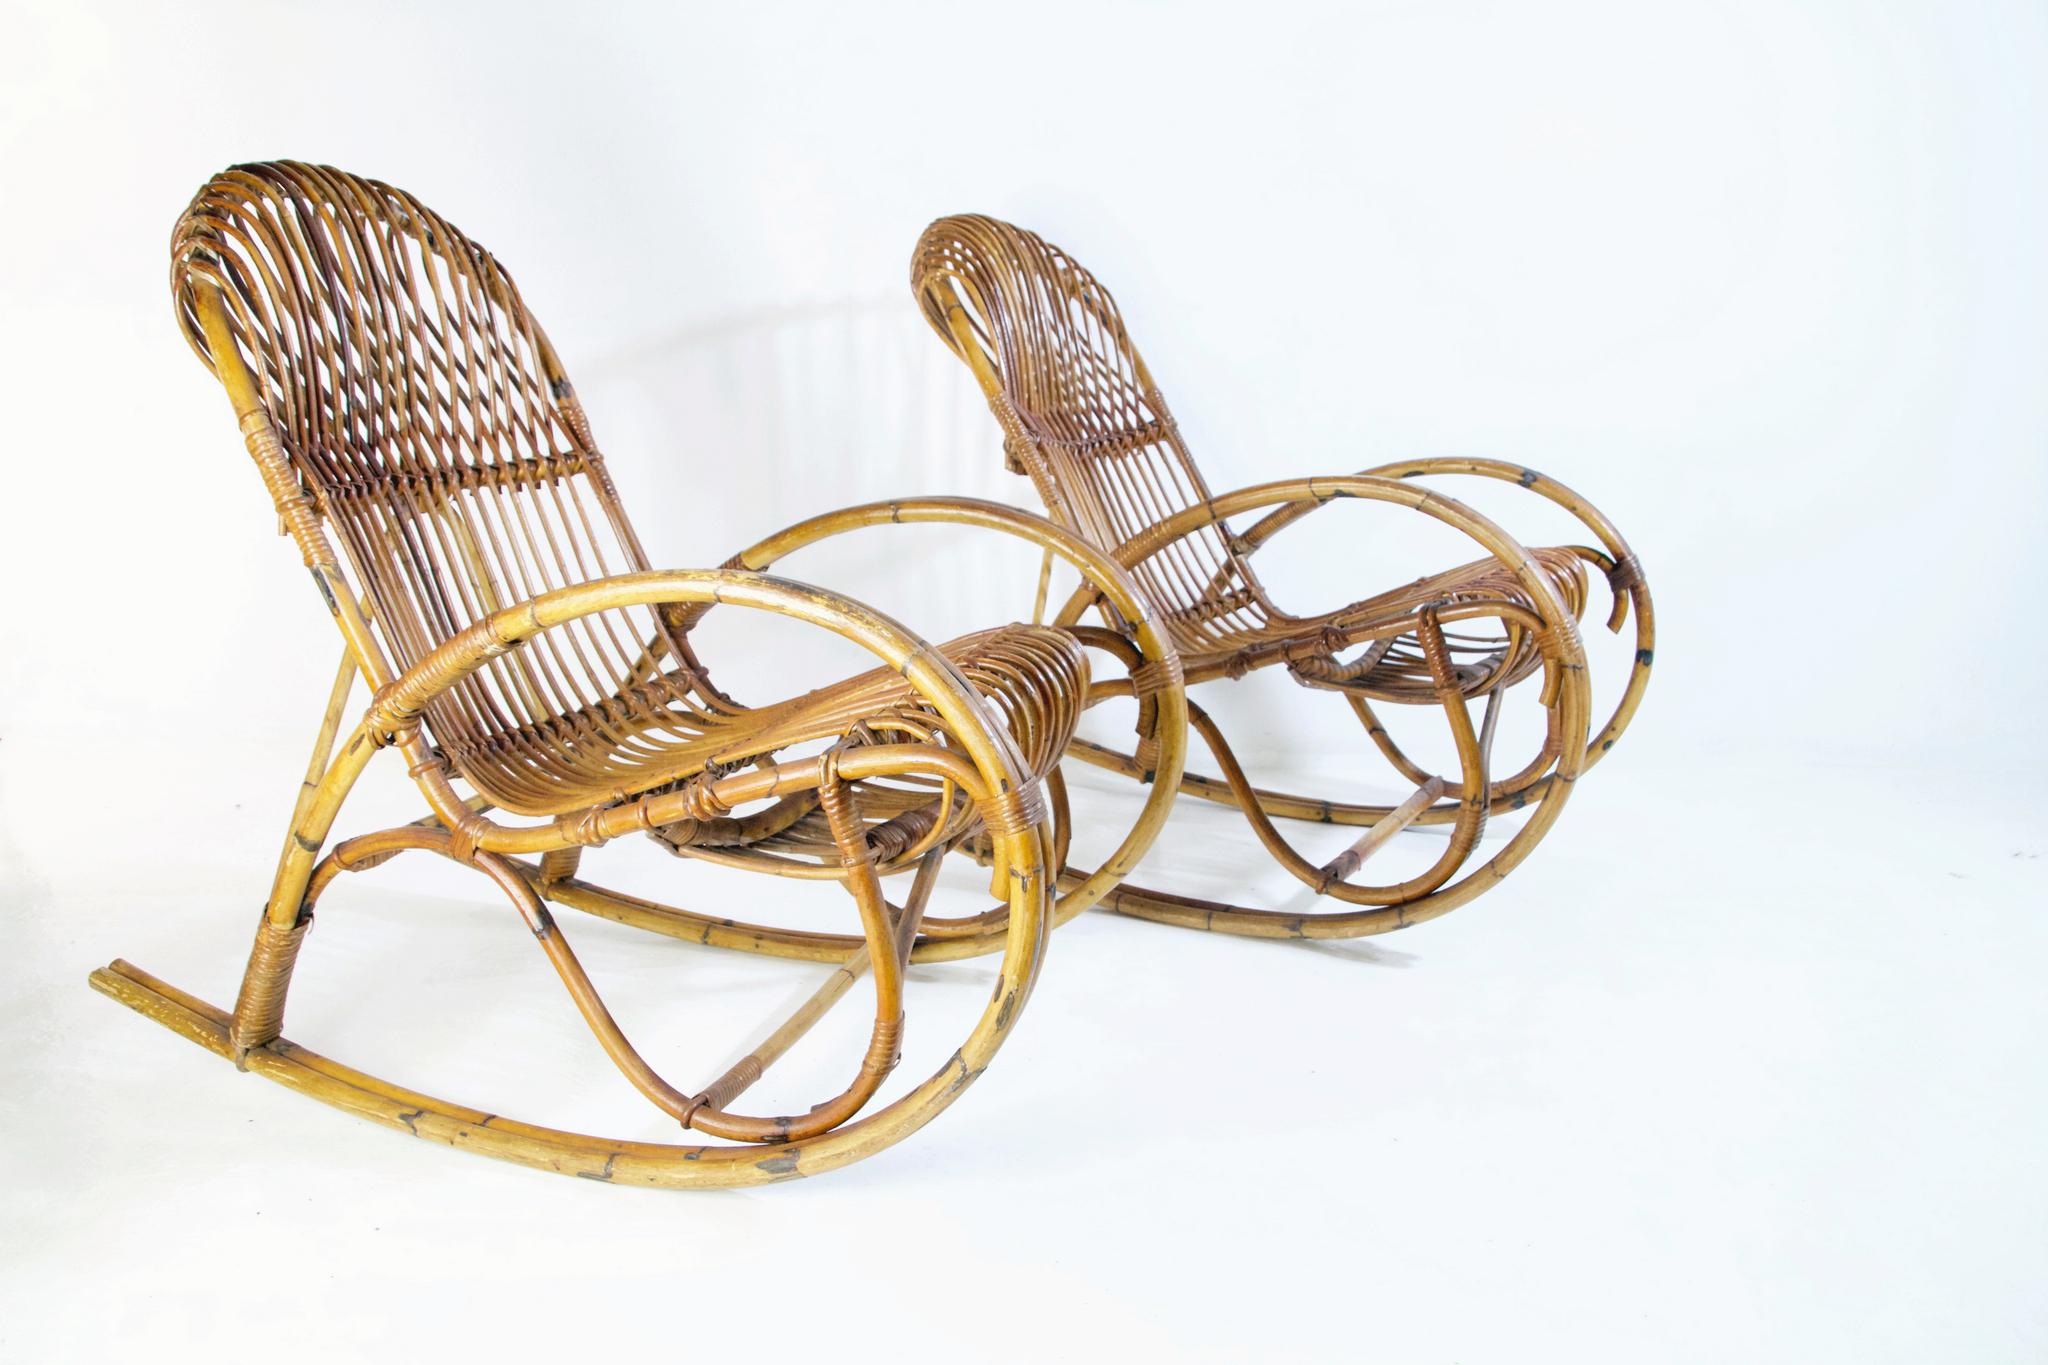 A pair of elegant and comfortable pair of rocking chairs in the style of Franco Albini Italy. The chairs are in very good condition and functions well.